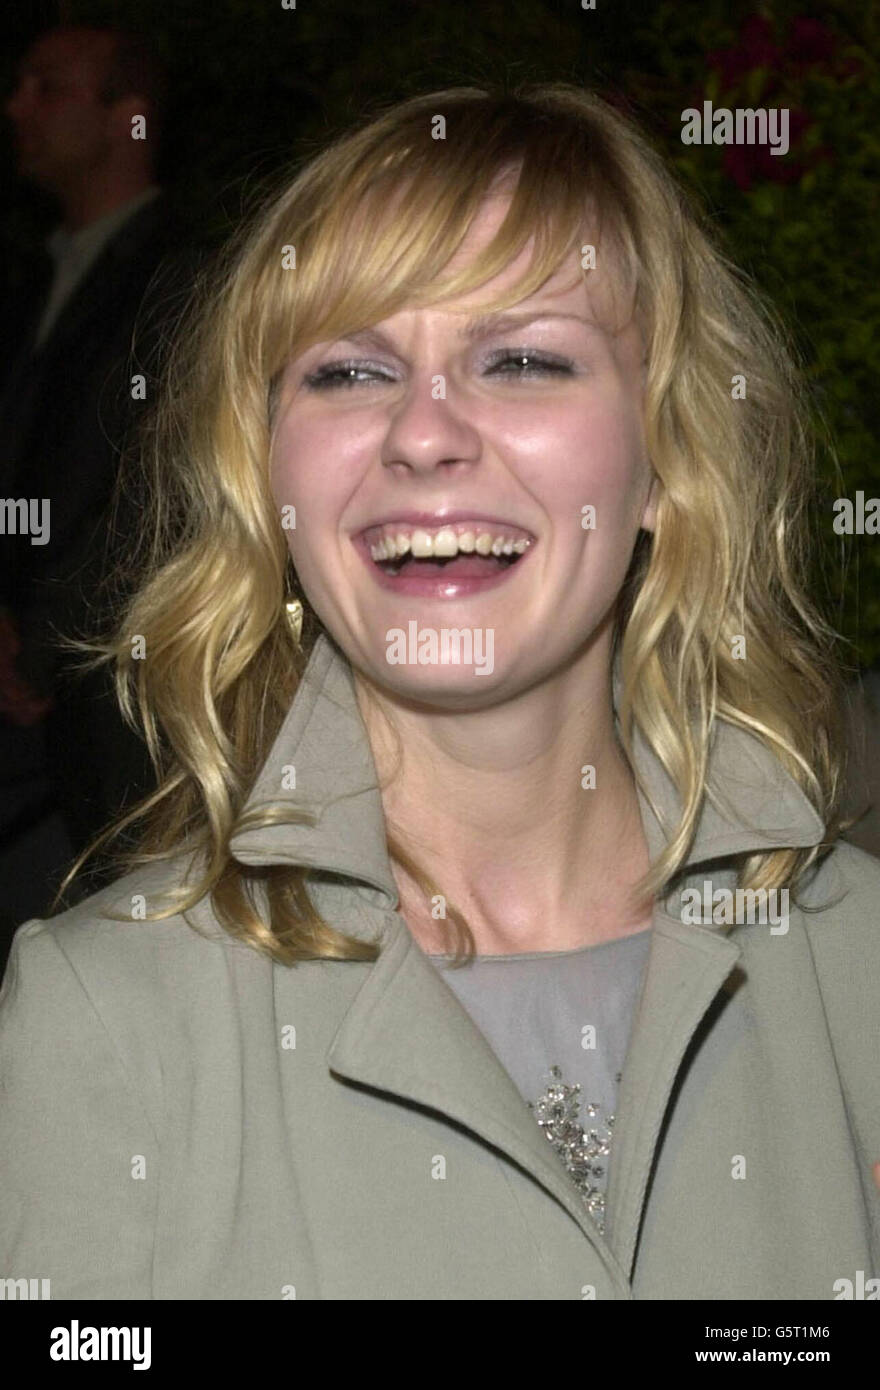 Cats Meow Premiere Kirsten Dunst. Kirsten Dunst arrives to the premiere of Cats Meow at Harmony Gold on Sunset Boulevard in Los Angeles. Stock Photo